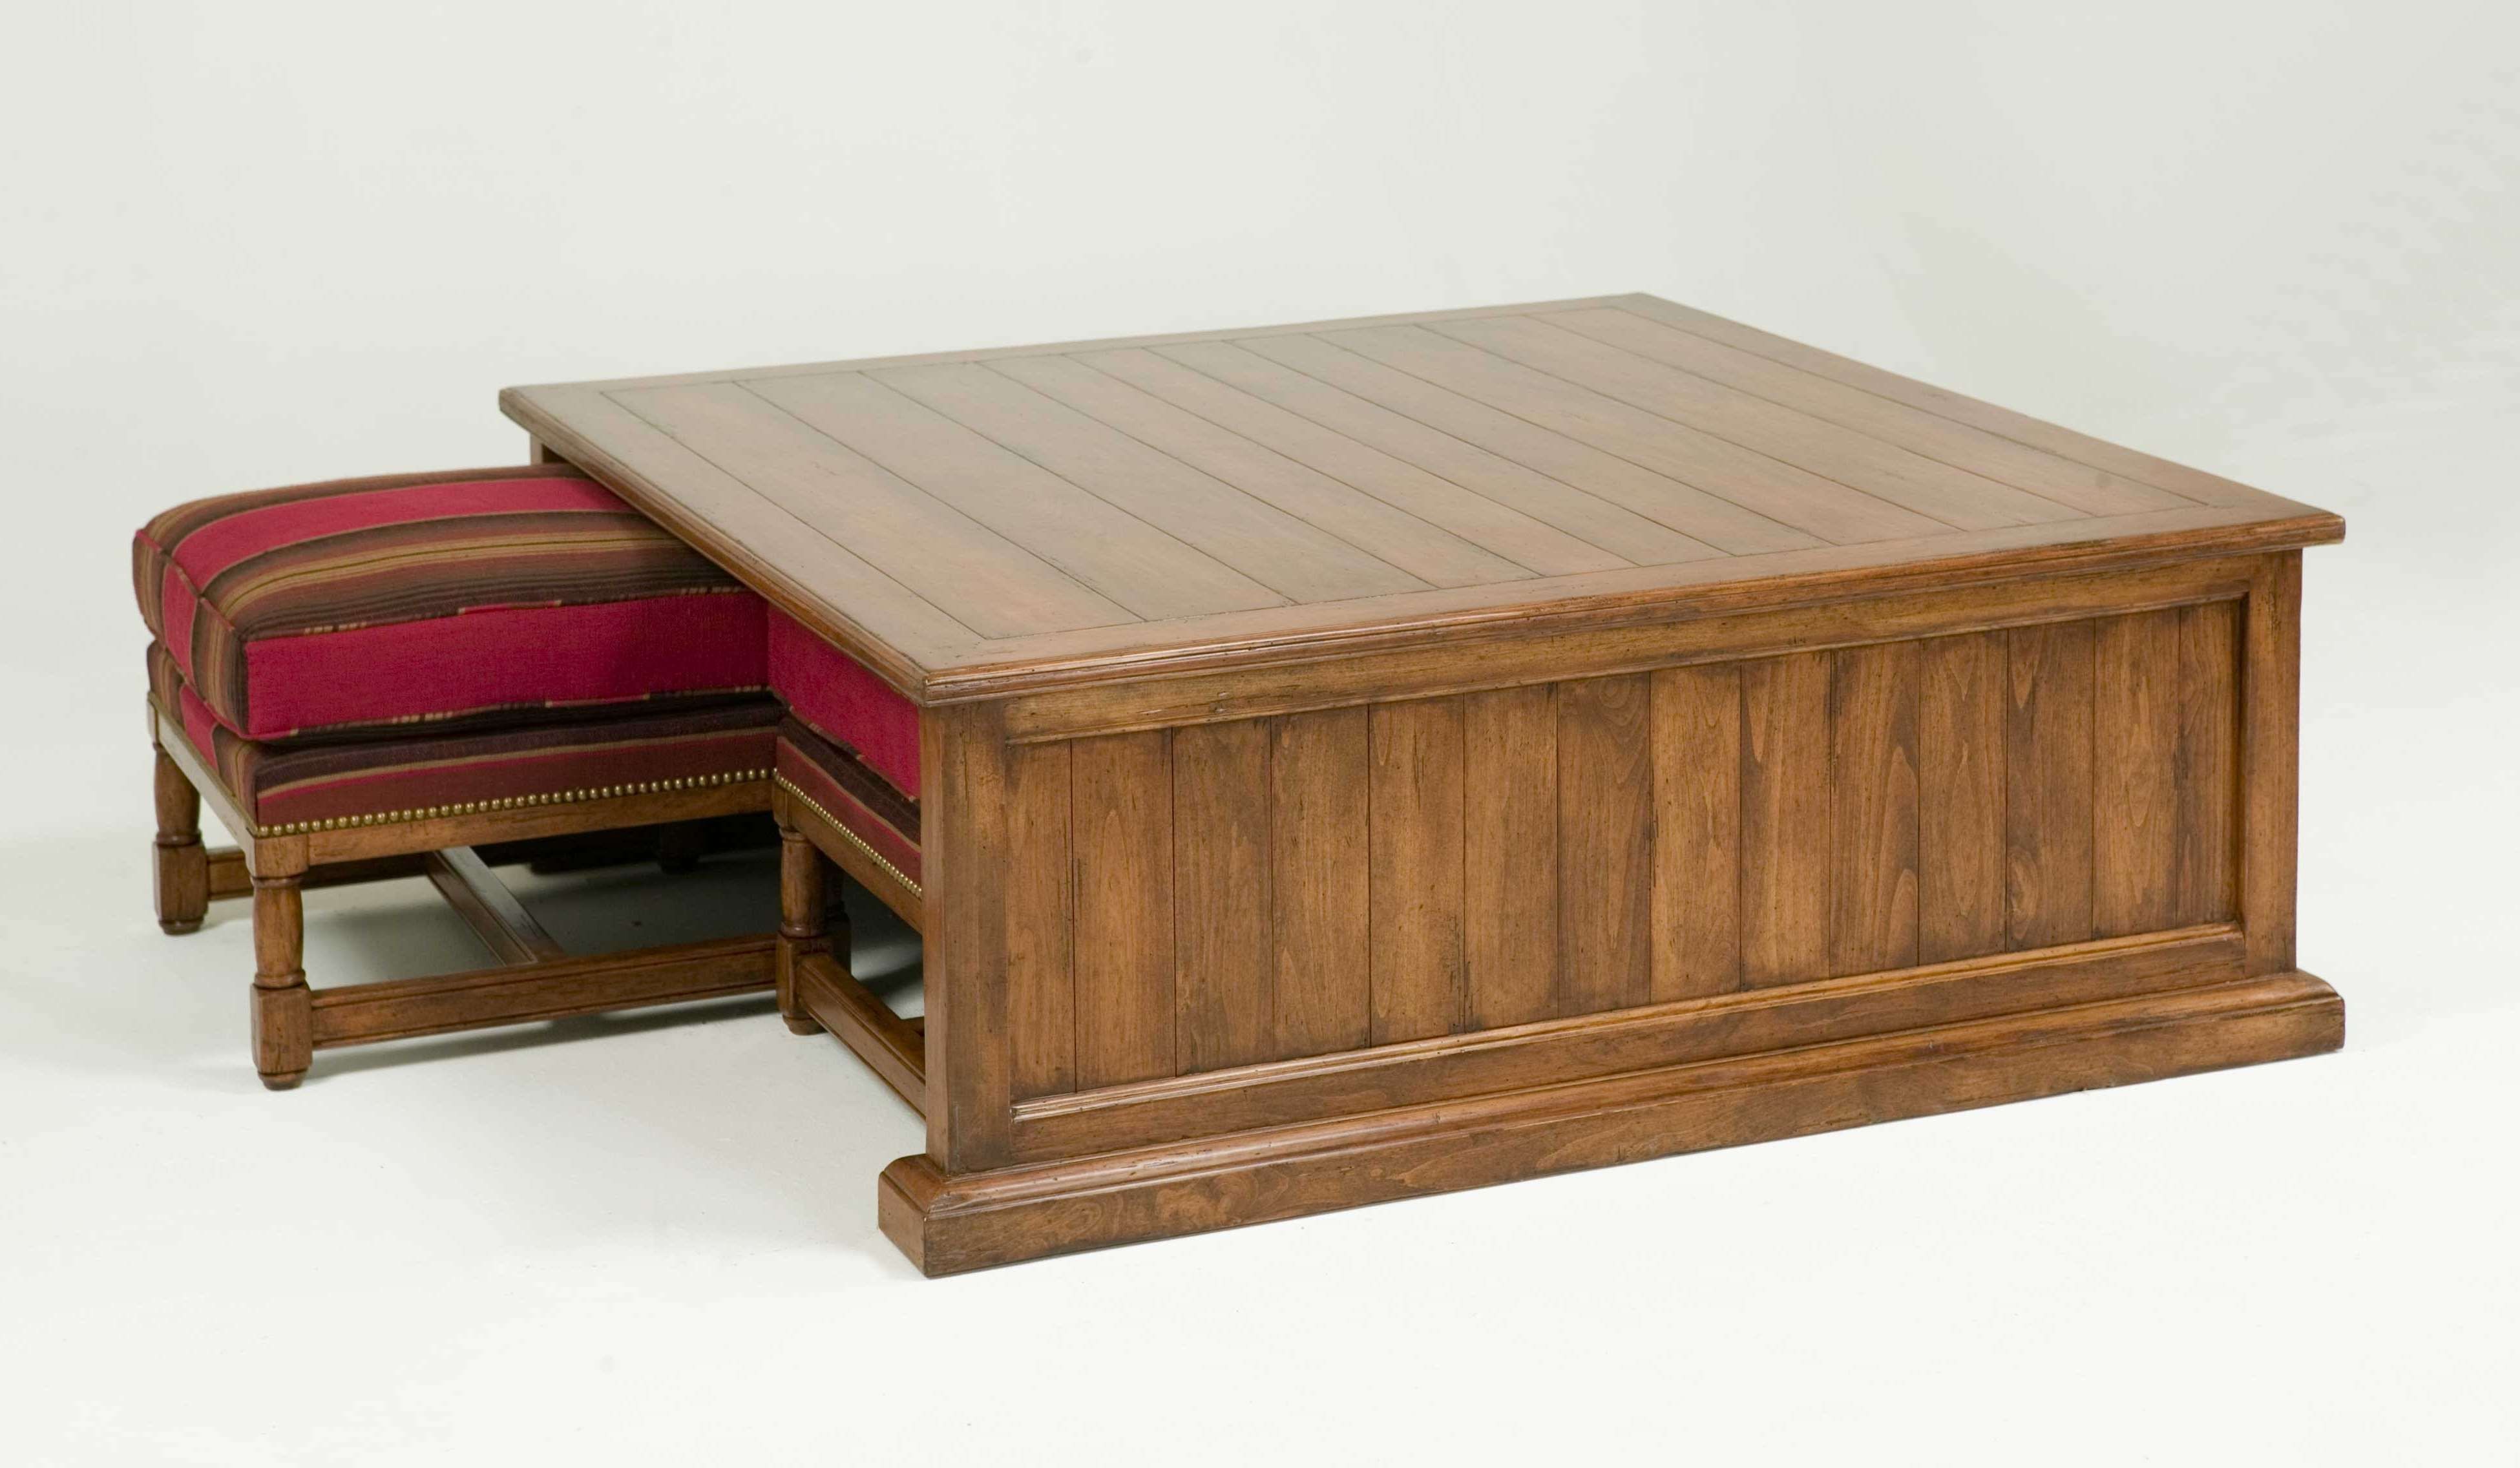 Modern Square Coffee Table With Storage With Trendy Espresso Regarding Most Recently Released Square Coffee Tables With Drawers (View 13 of 20)